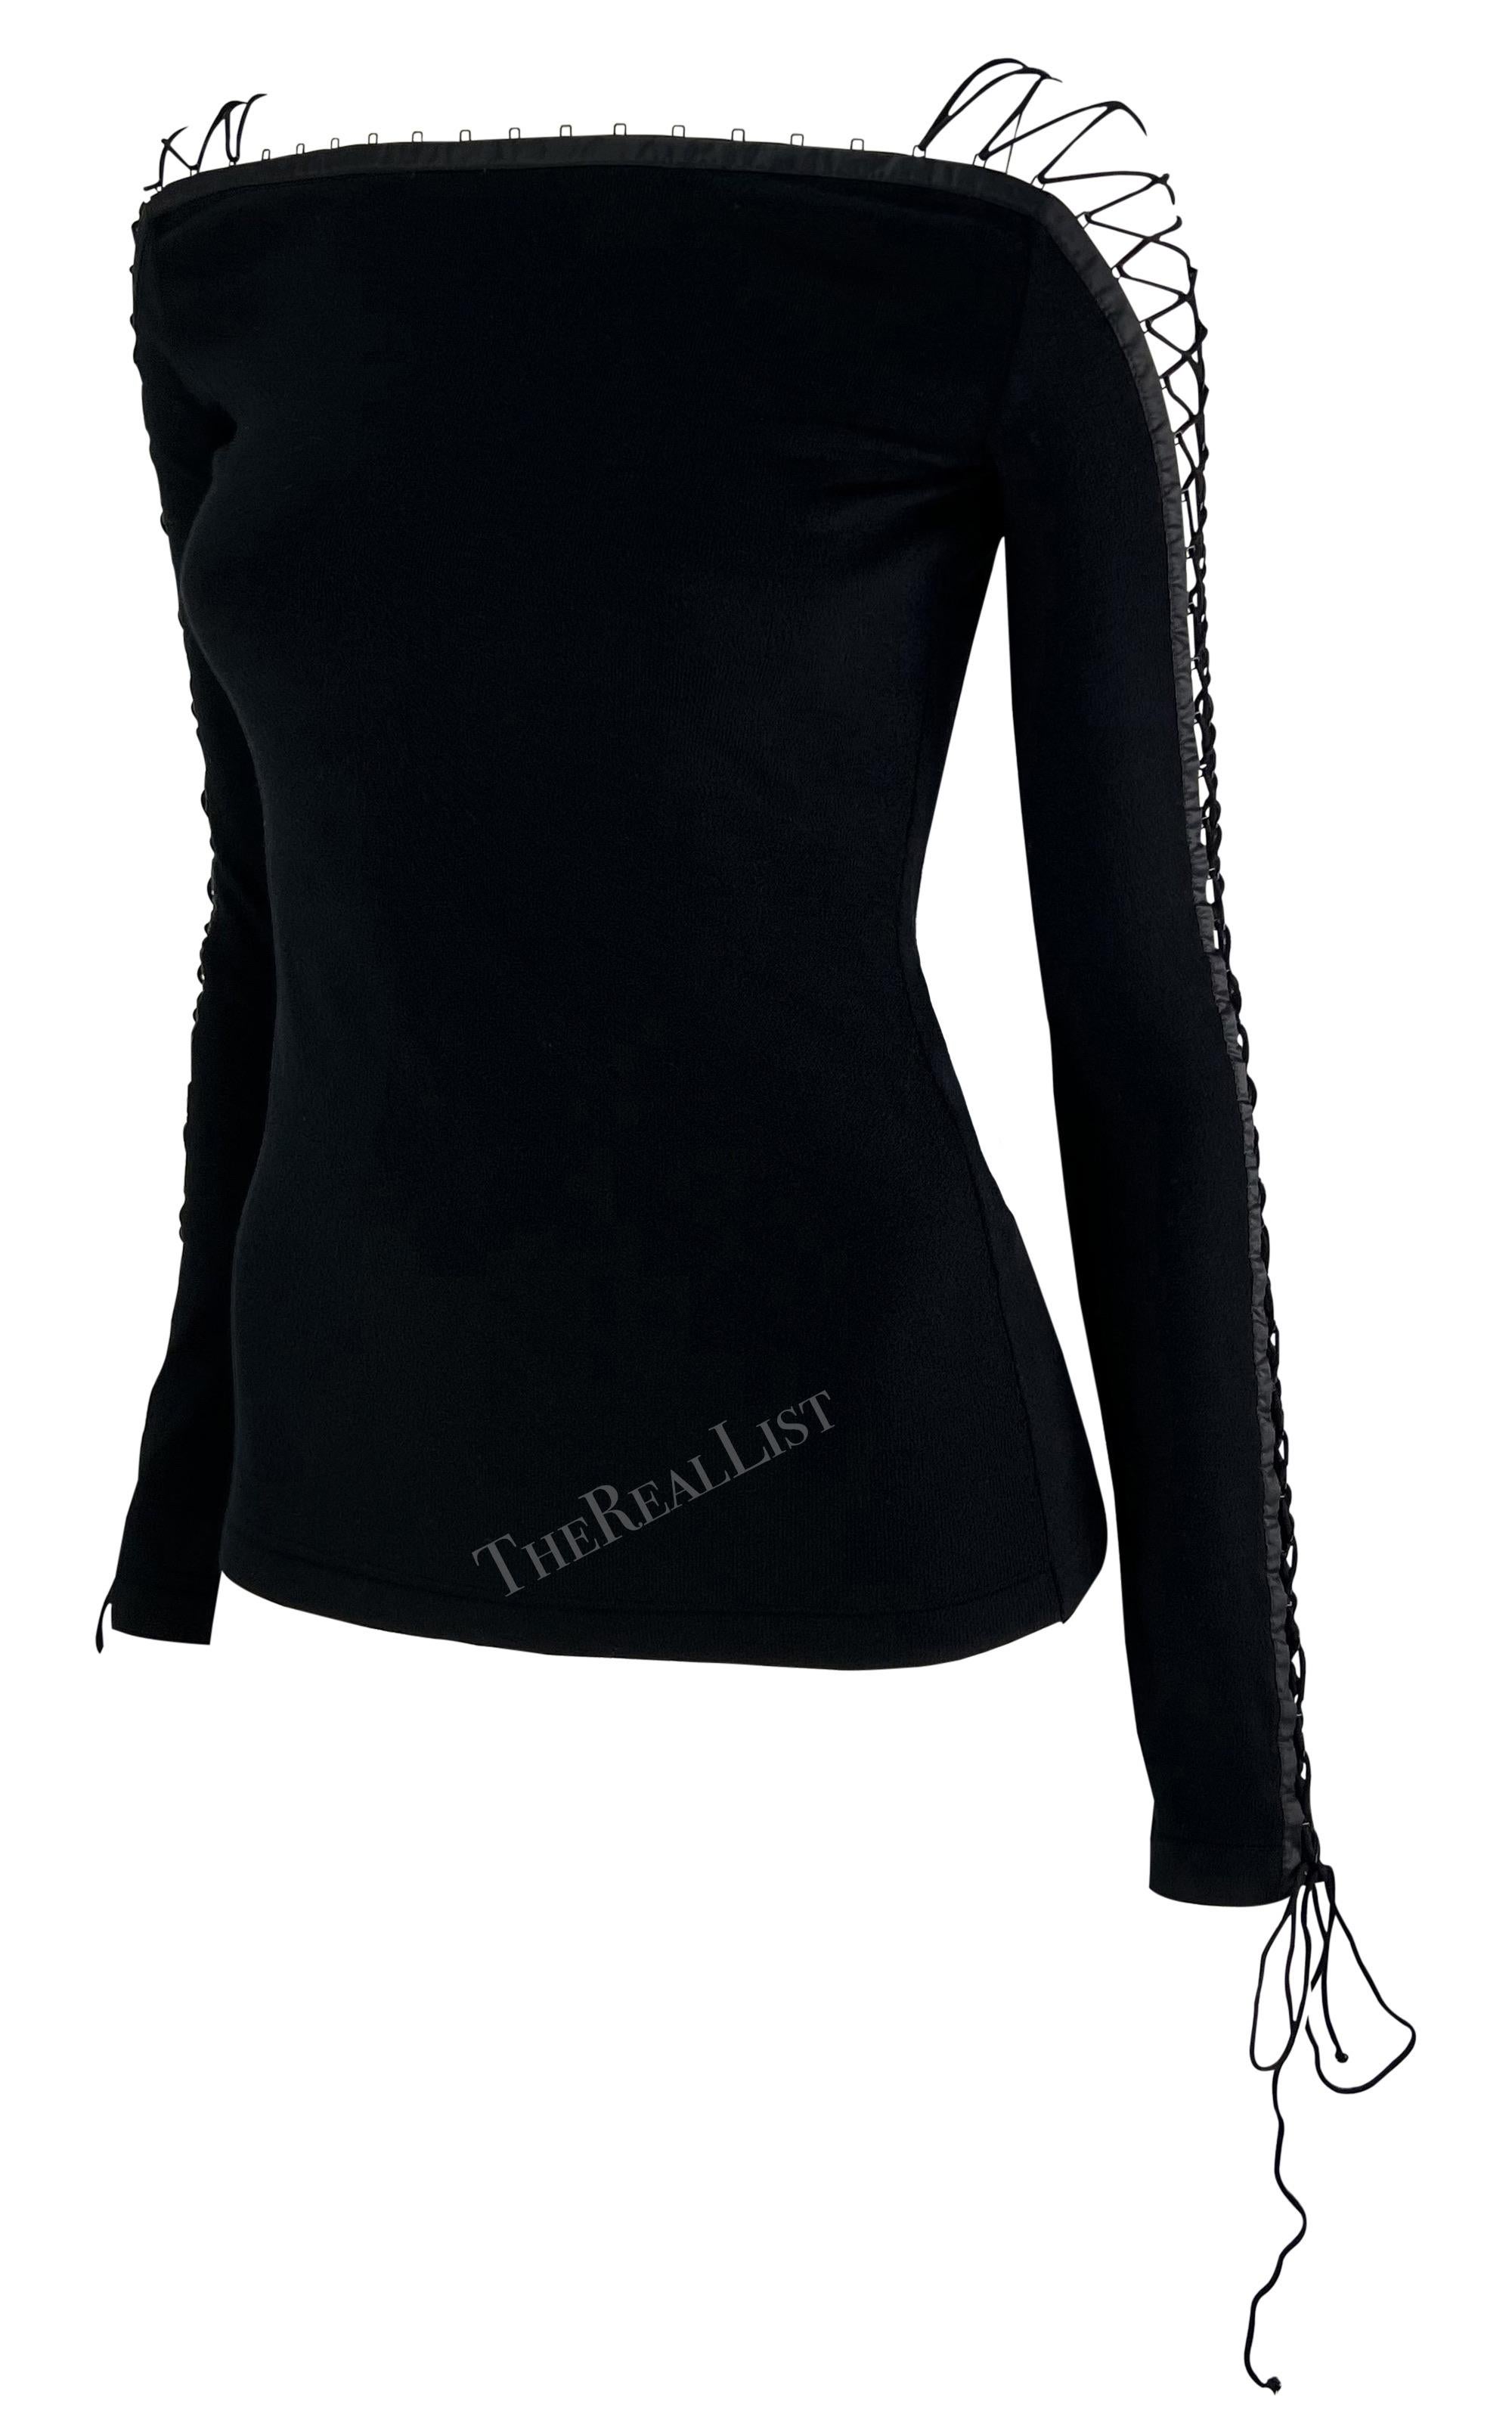 Early 2000s Dolce & Gabbana Black Lace Up Long Sleeve Corset Top In Excellent Condition For Sale In West Hollywood, CA